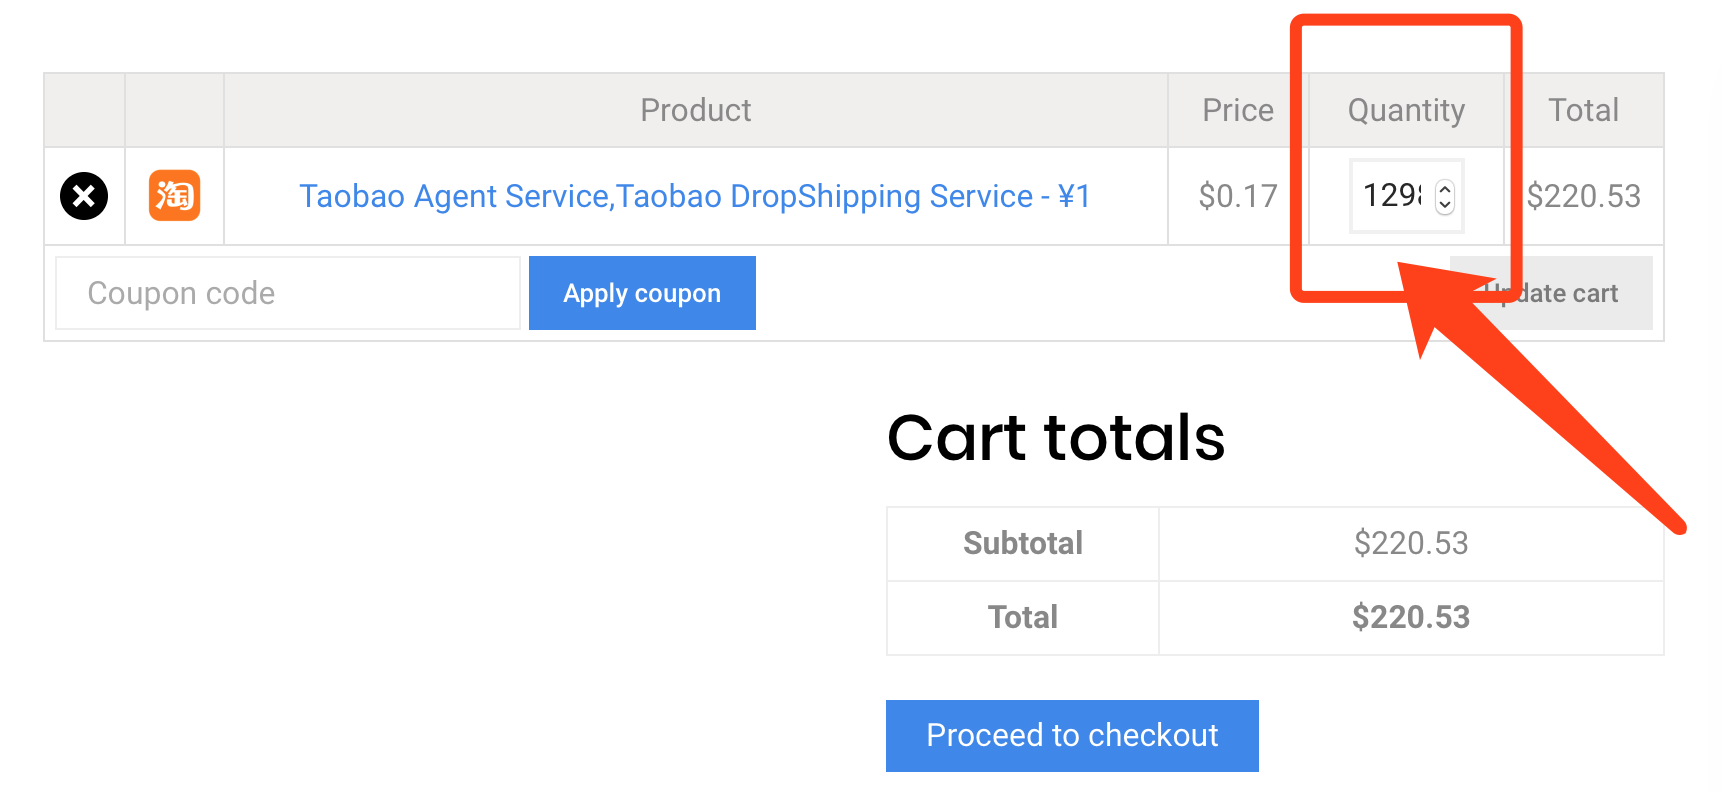 How To Buy From Taobao China Without Alipay Yayaka - can't buy robux with alipay